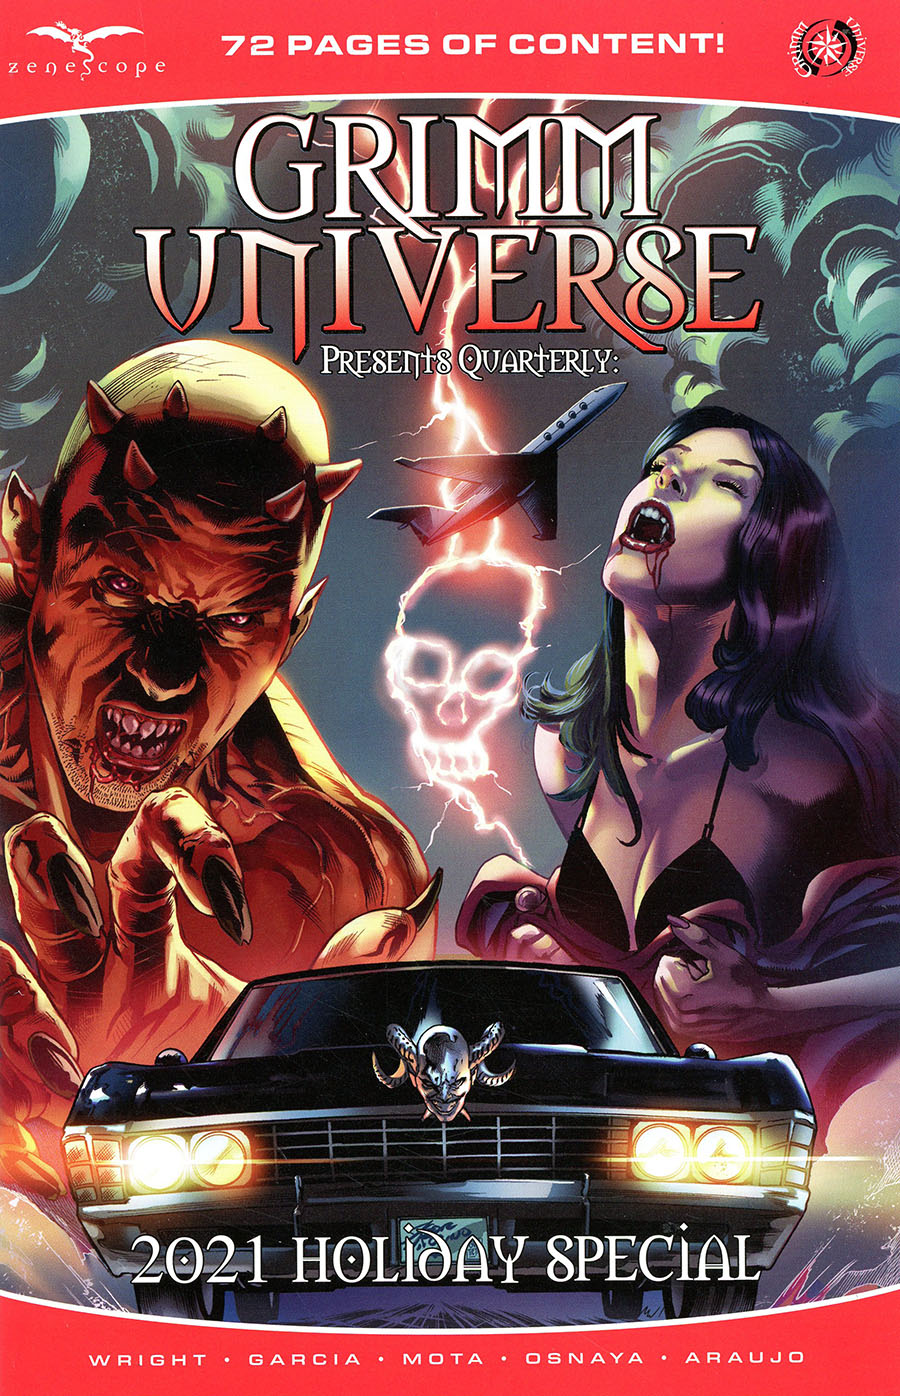 Grimm Fairy Tales Presents Grimm Universe Quarterly #4 2021 Holiday Special Cover A Igor Vitorino